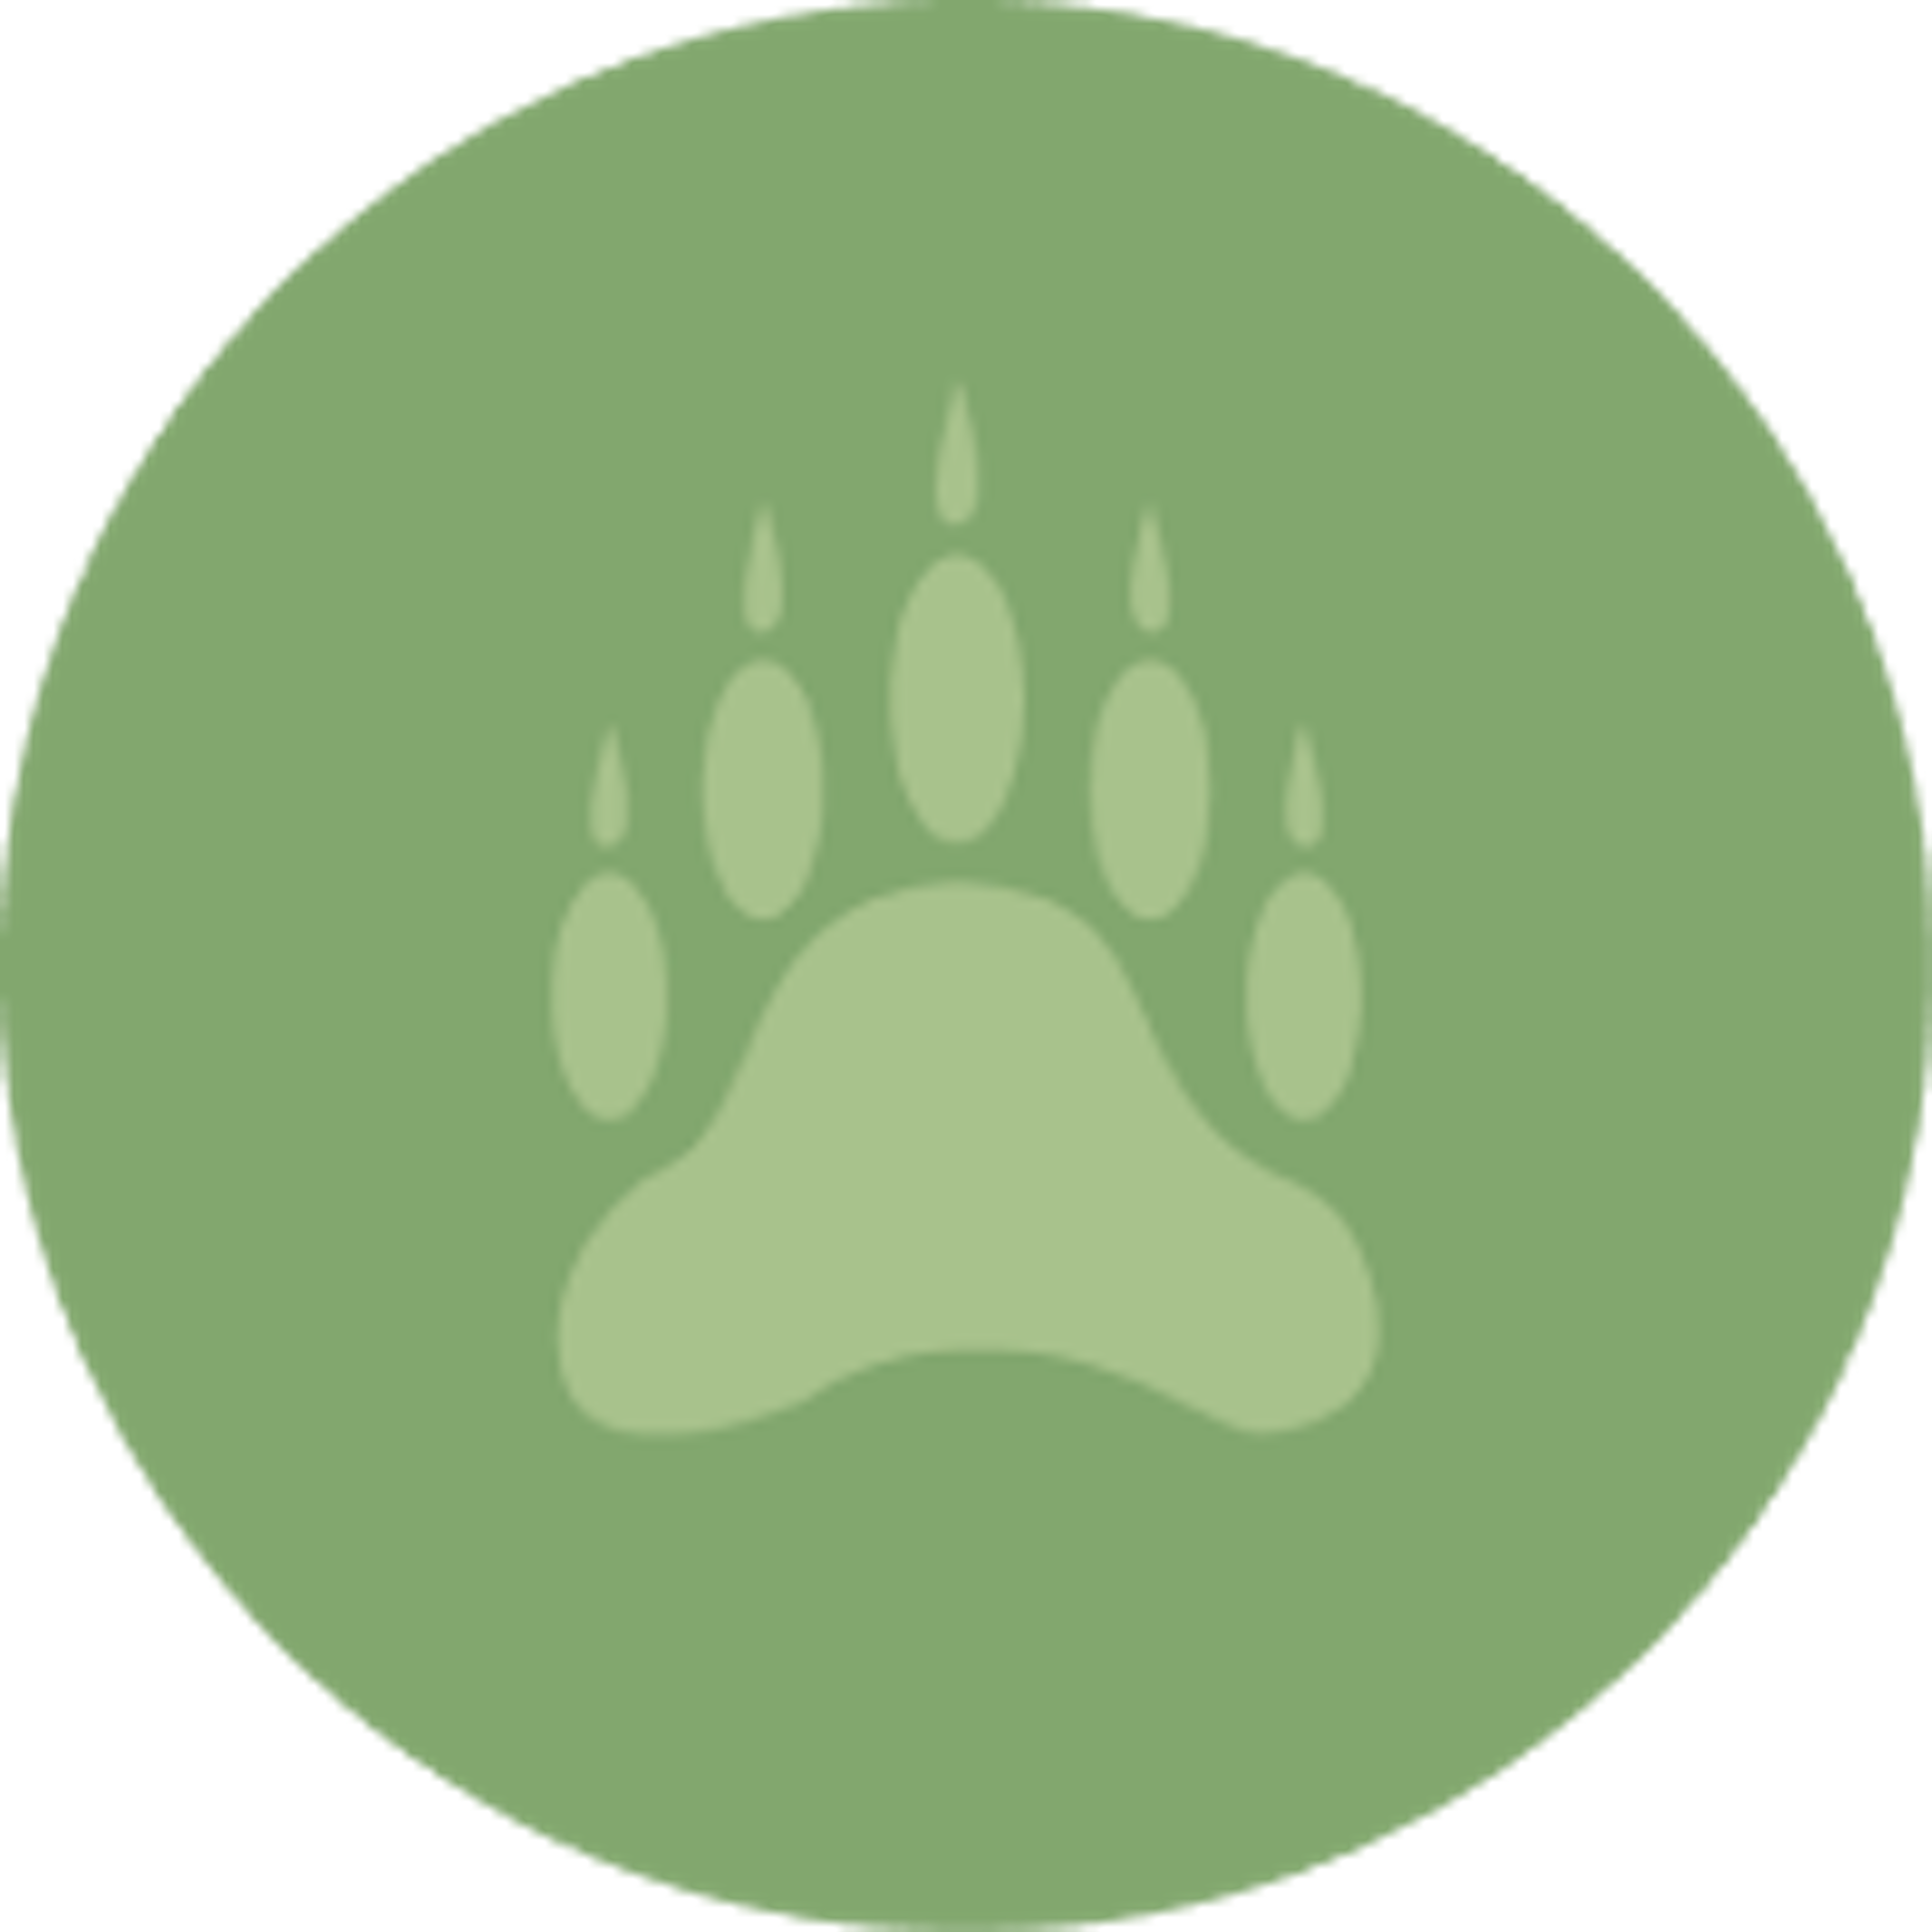 Member card paw placeholder